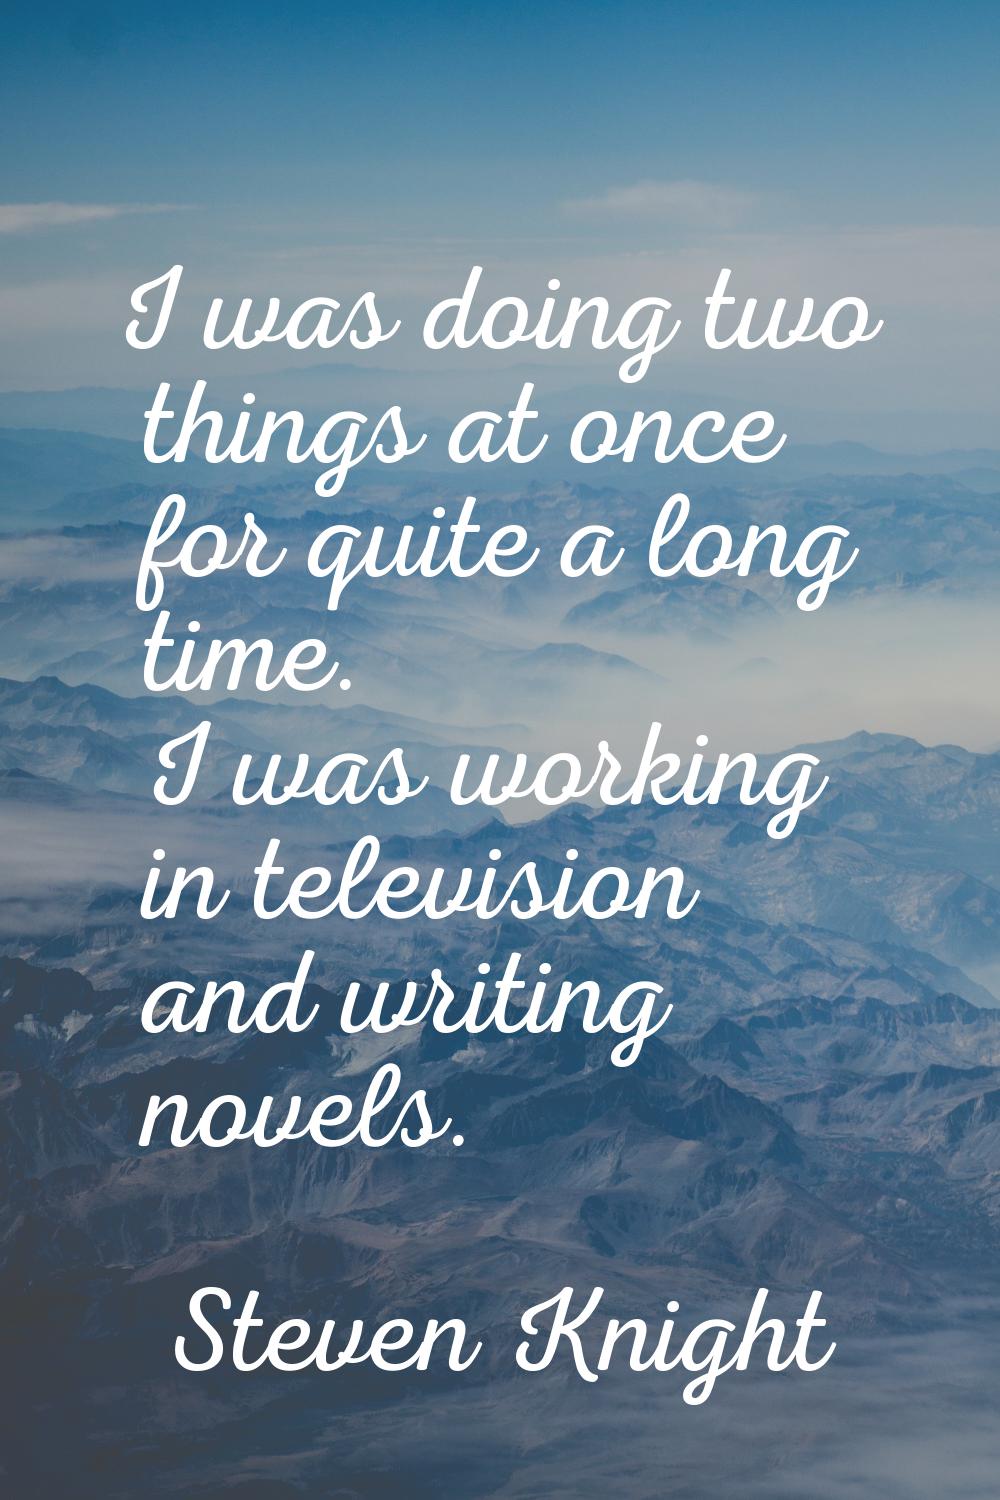 I was doing two things at once for quite a long time. I was working in television and writing novel